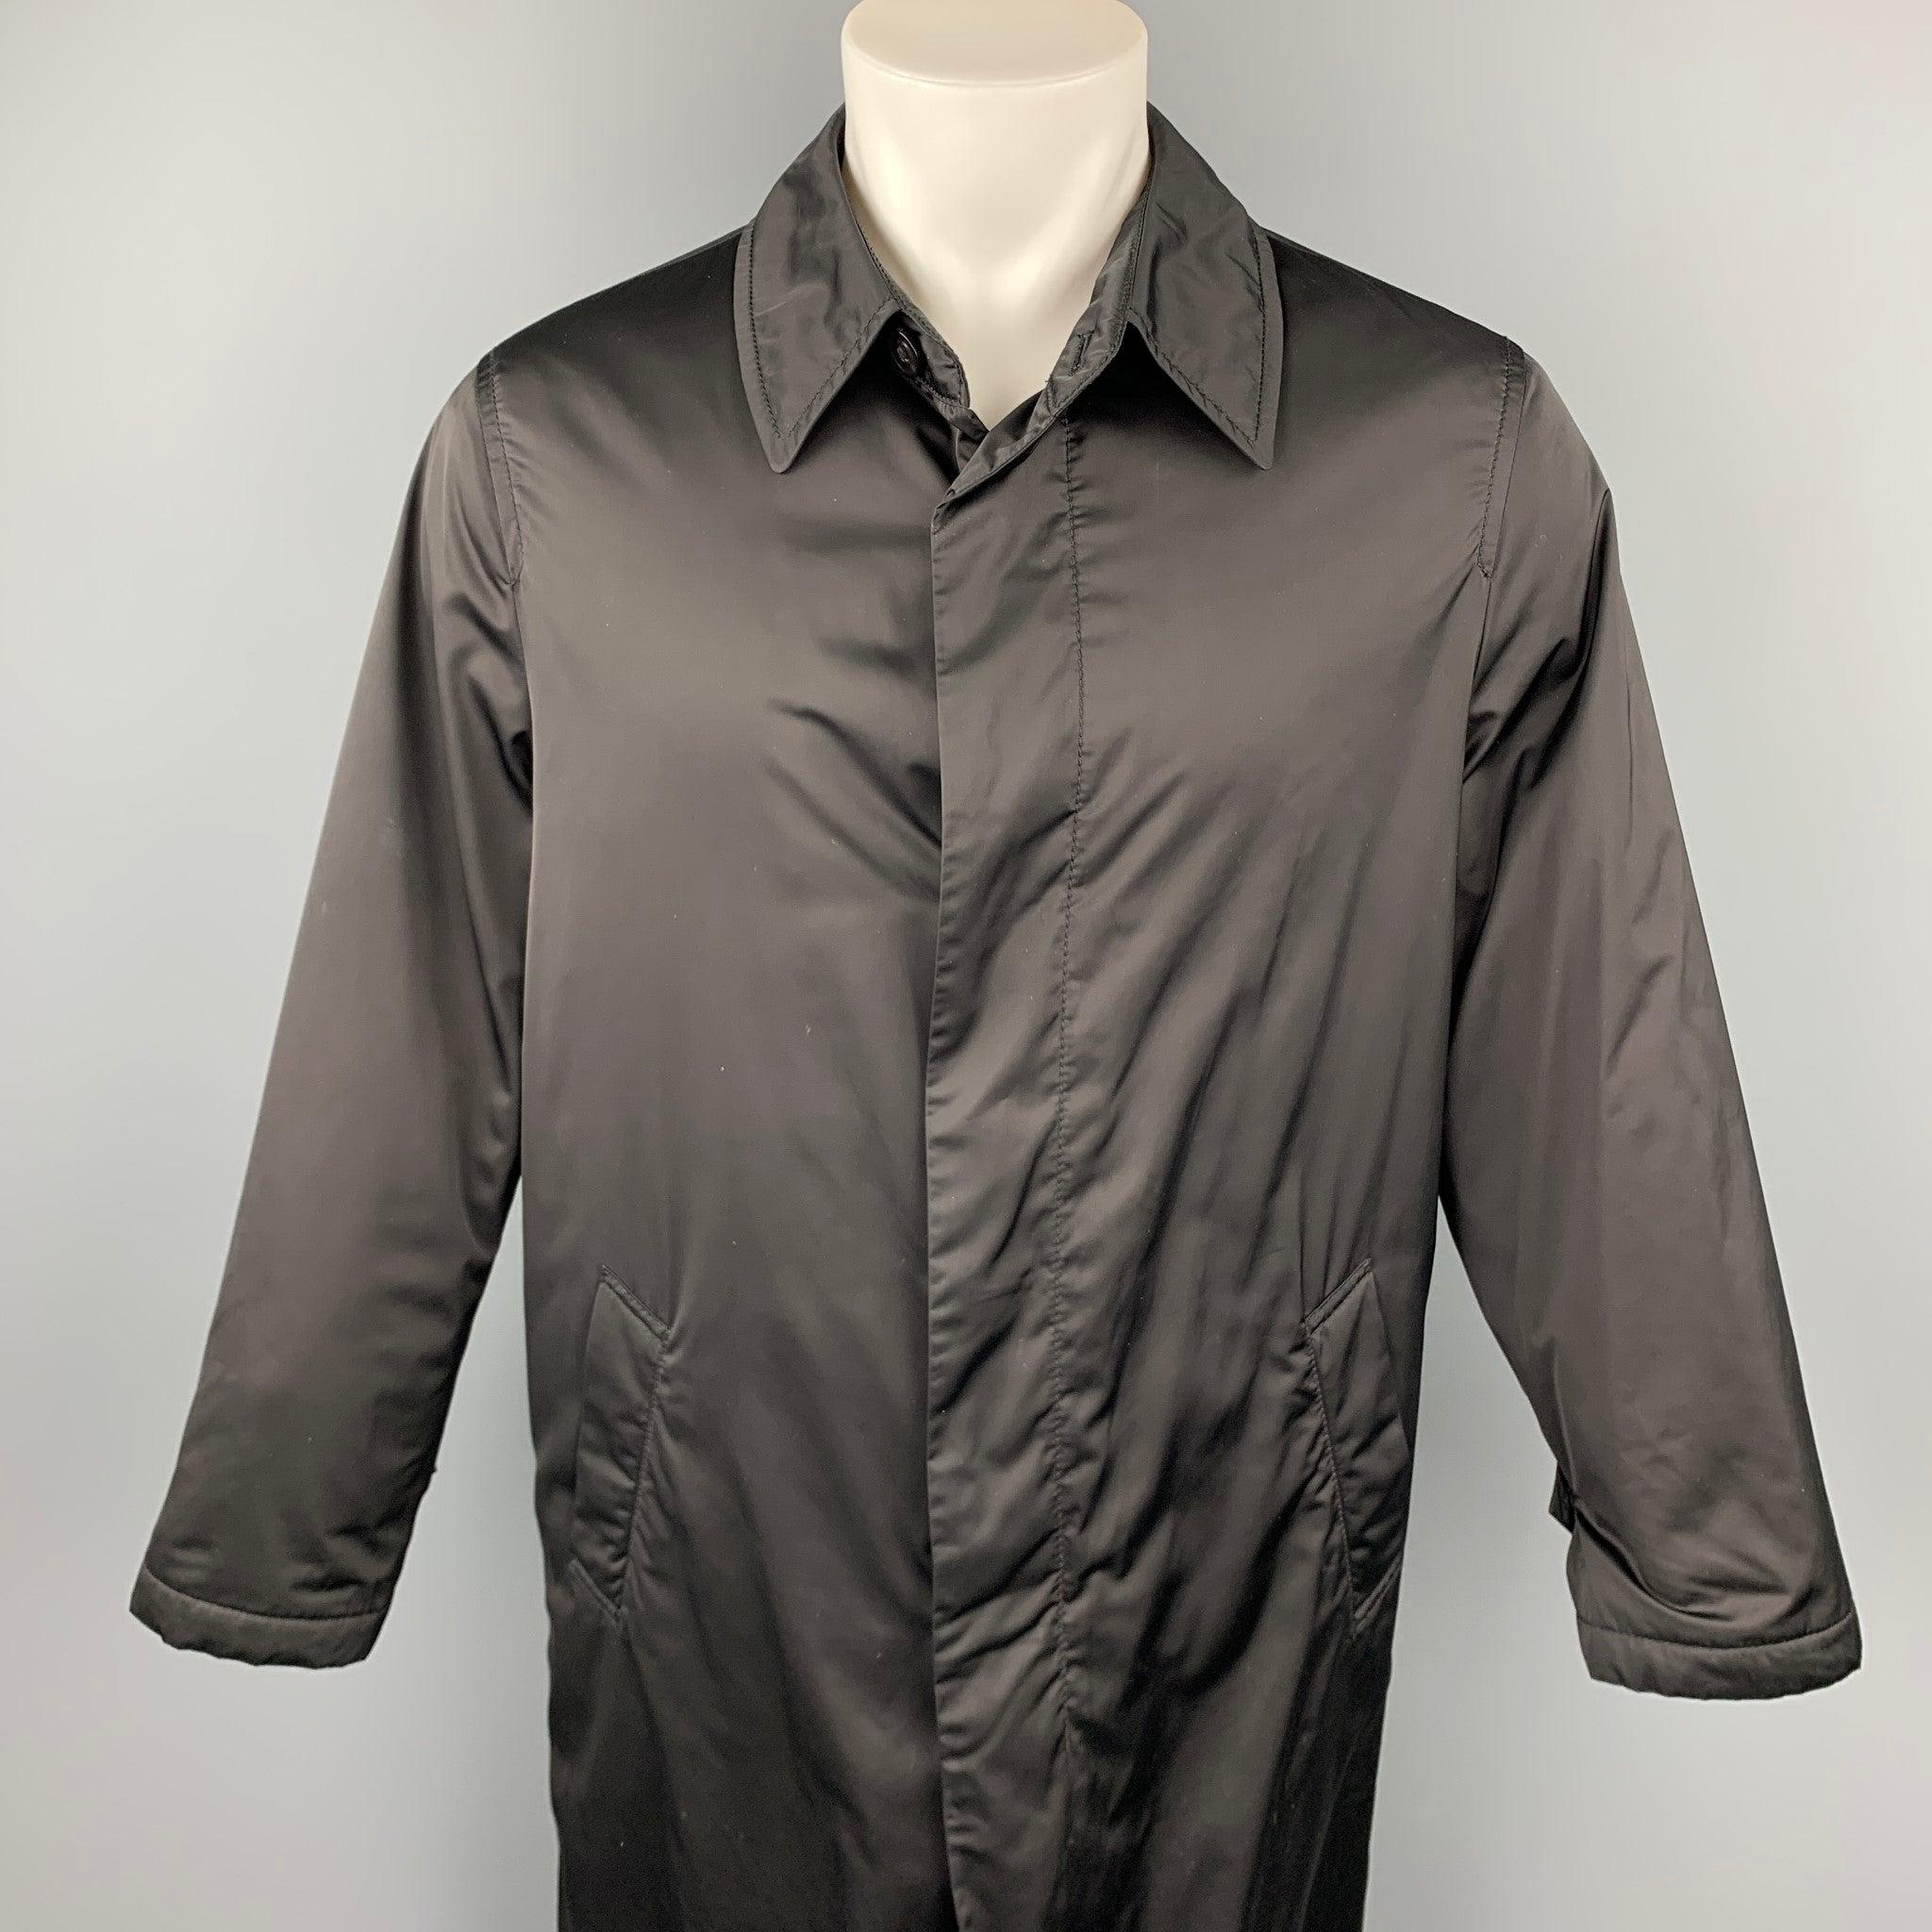 ARMANI COLLEZIONI raincoat comes in a black polyester with a rain repellent material featuring a spread collar, slit pockets, and a hidden button closure. Minor discoloration on the back.
 Good
 Pre-Owned Condition. 
 

 Marked:  40 
 

